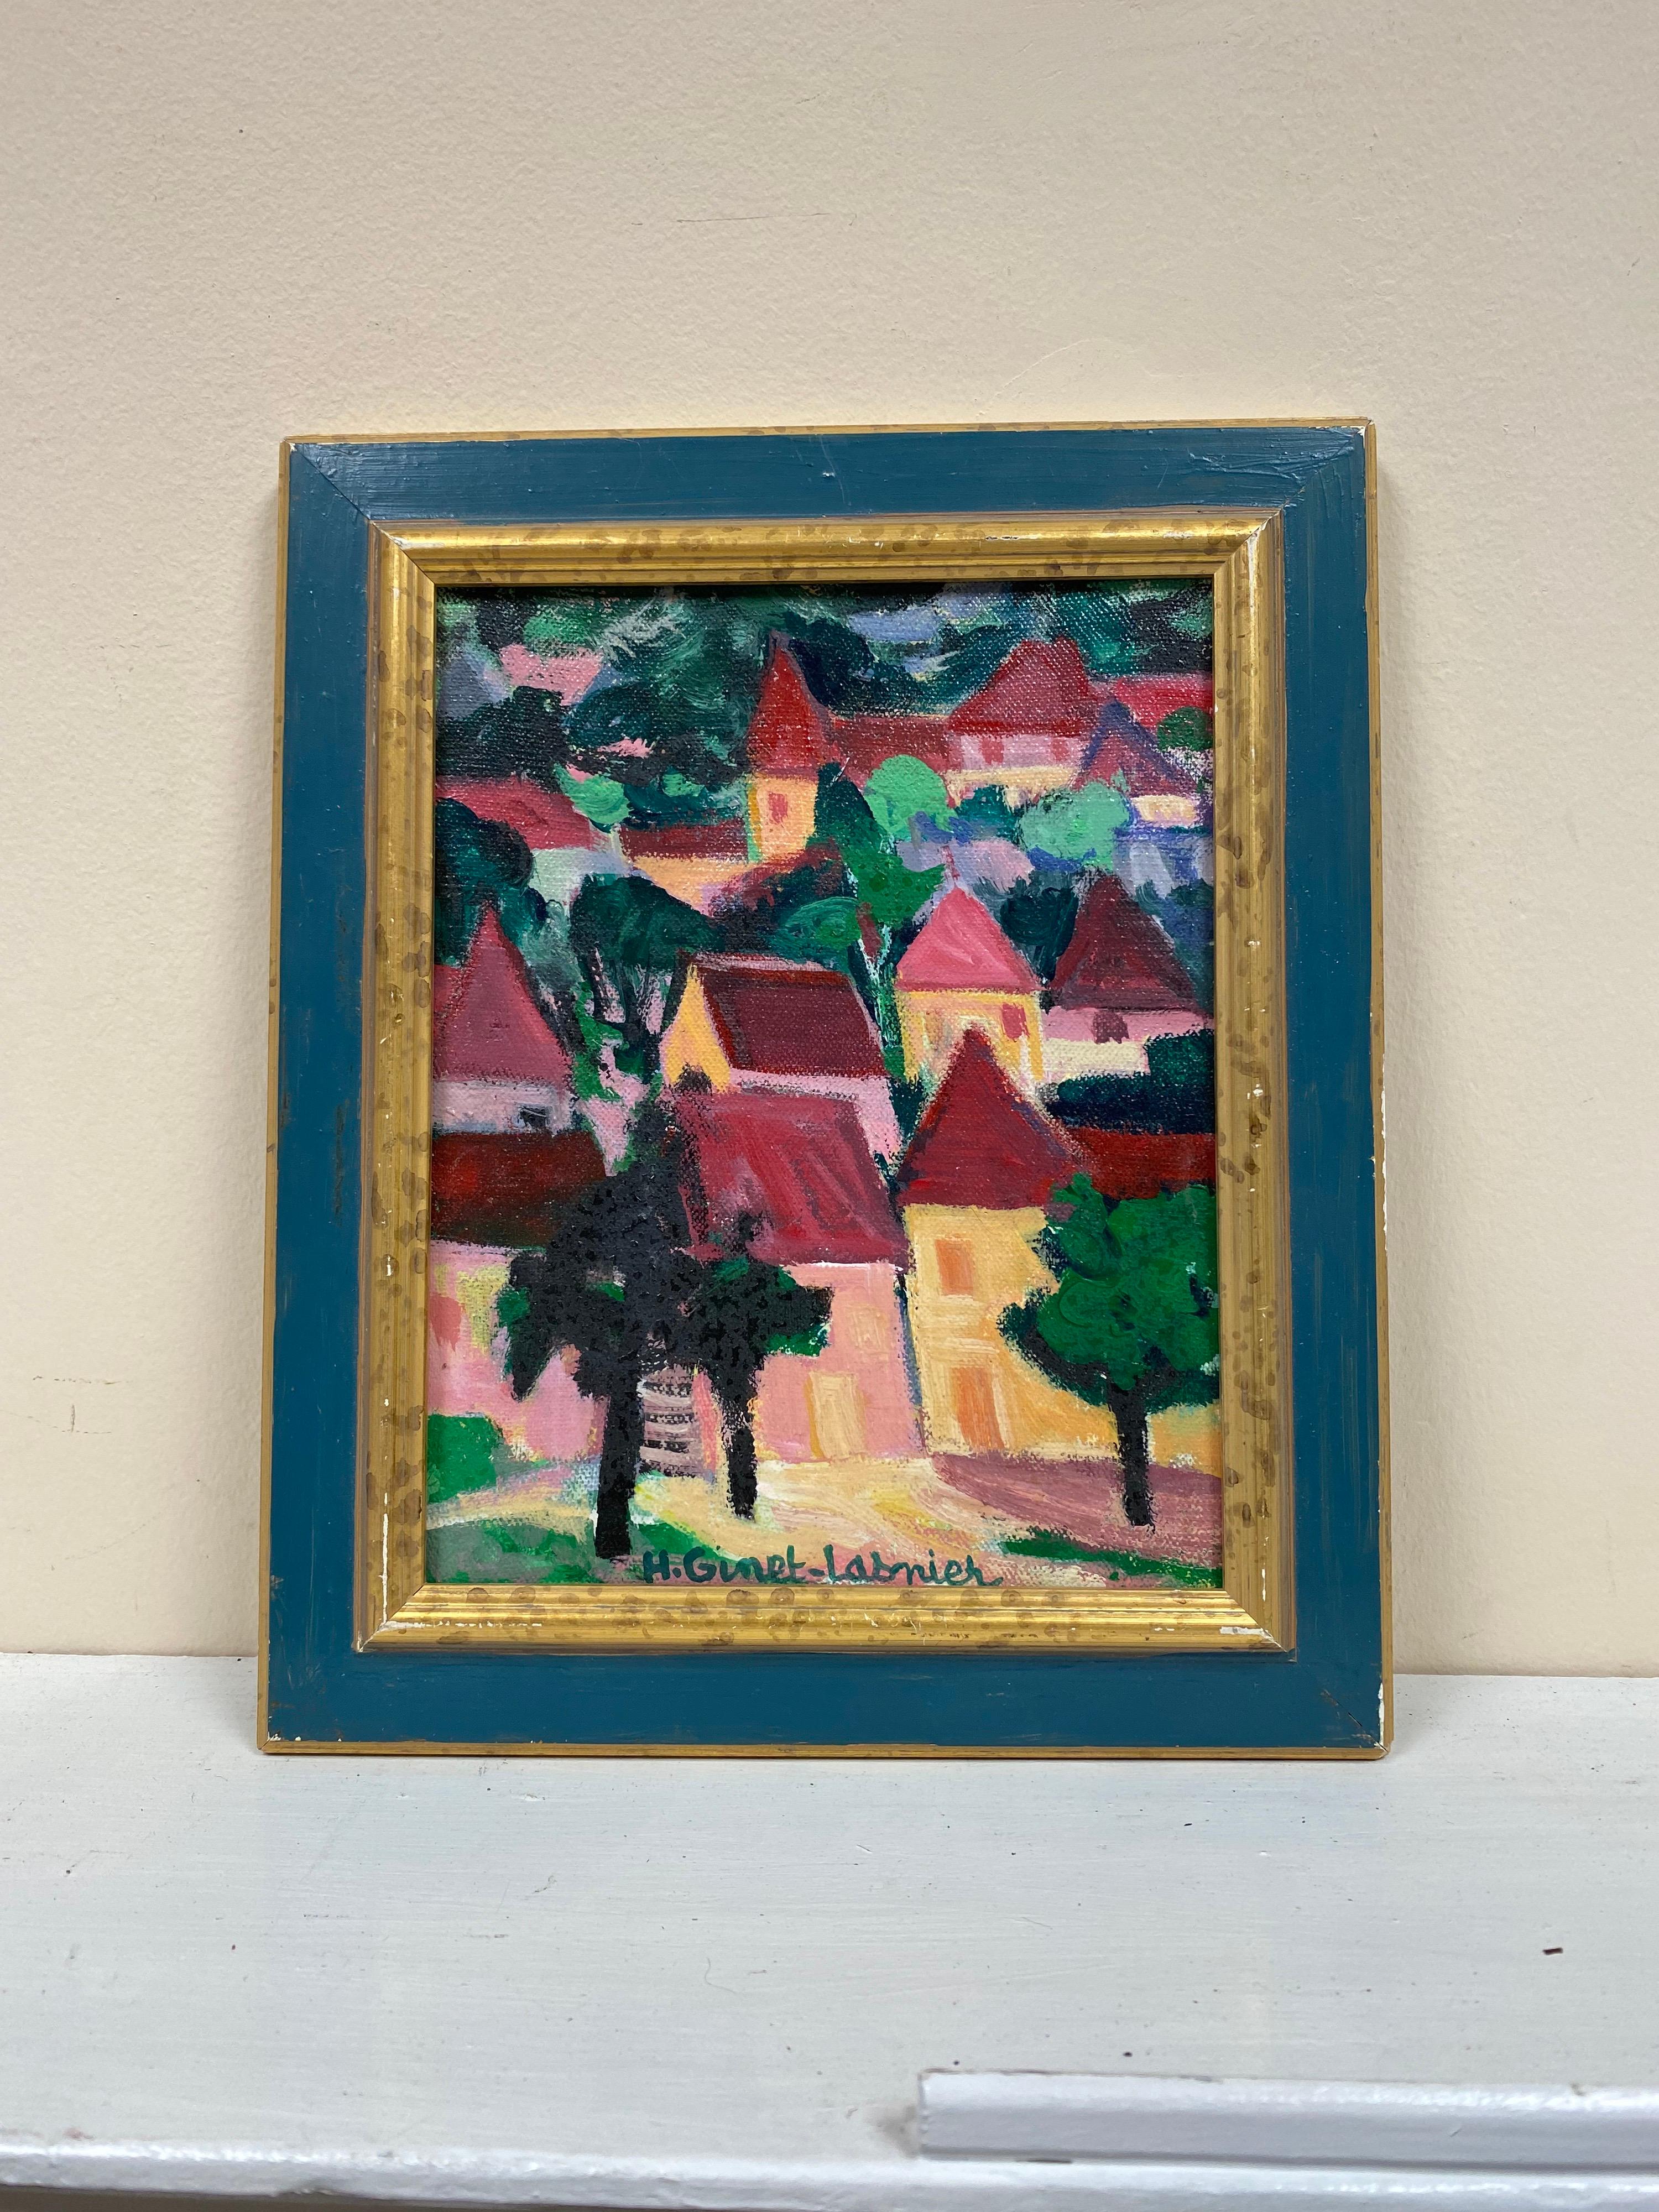 Vintage French Post-Impressionist Signed Oil - Bright and Colourful Town Scene - Painting by Huguette Ginet-Lasnier 